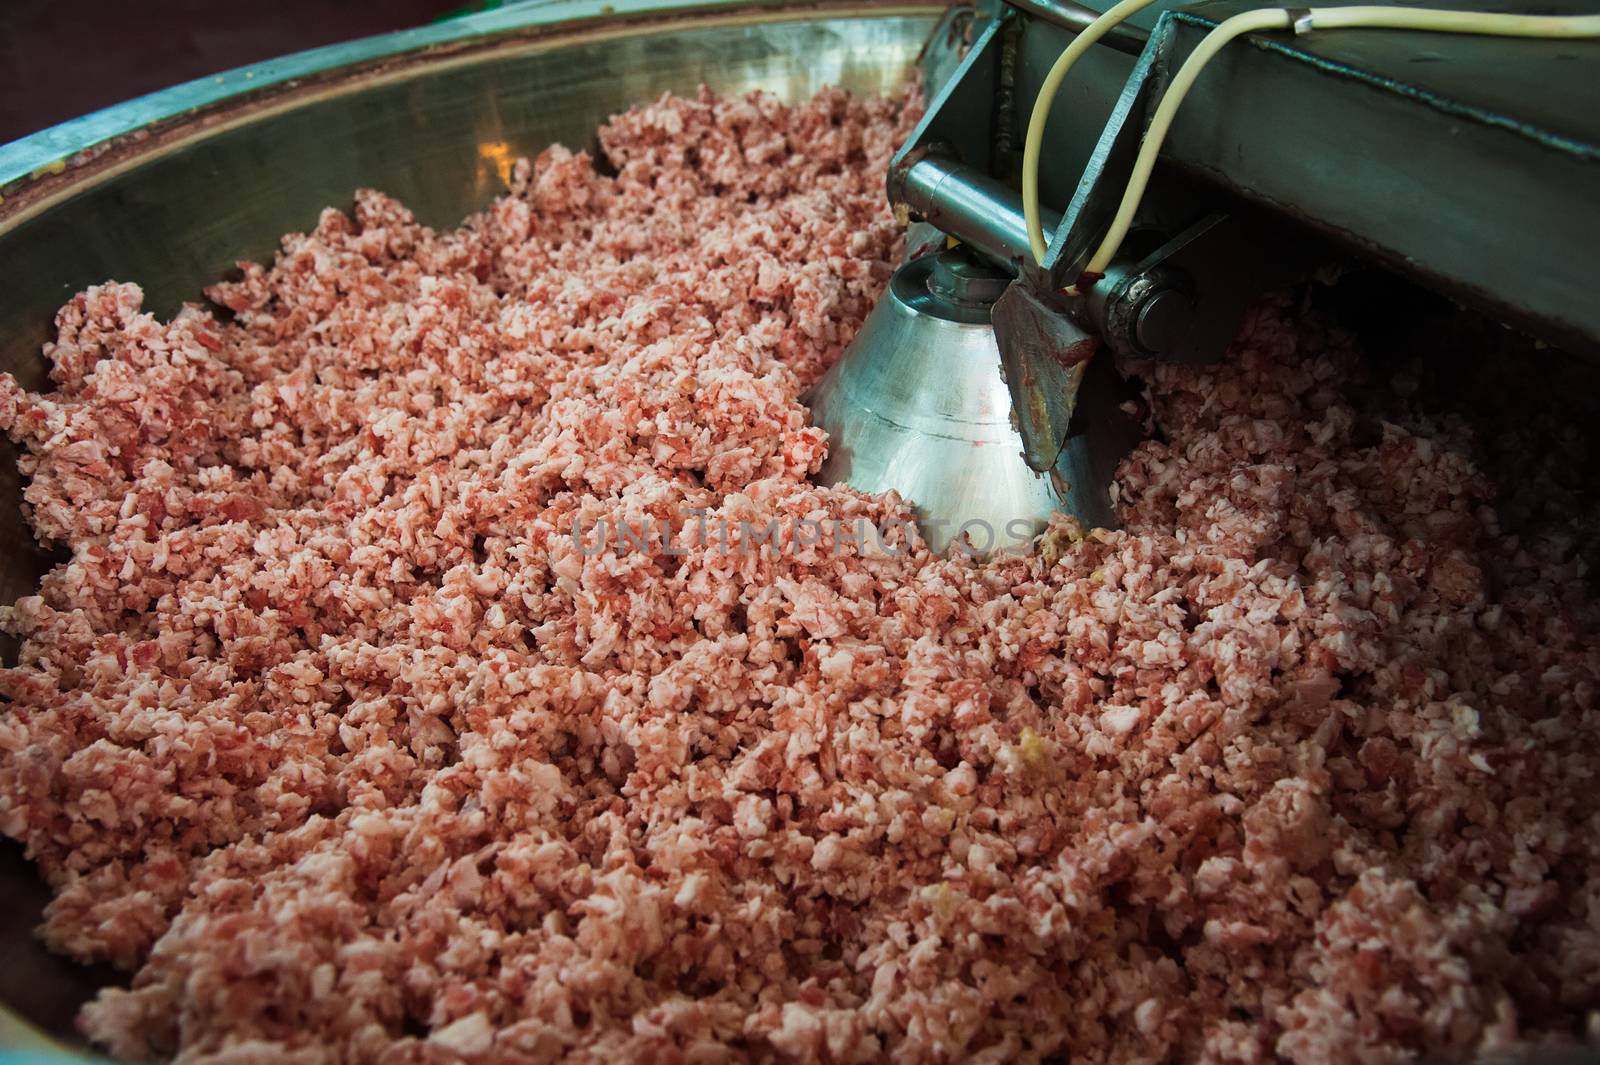 Mixing ingredients for sausages on a production line by grigorenko